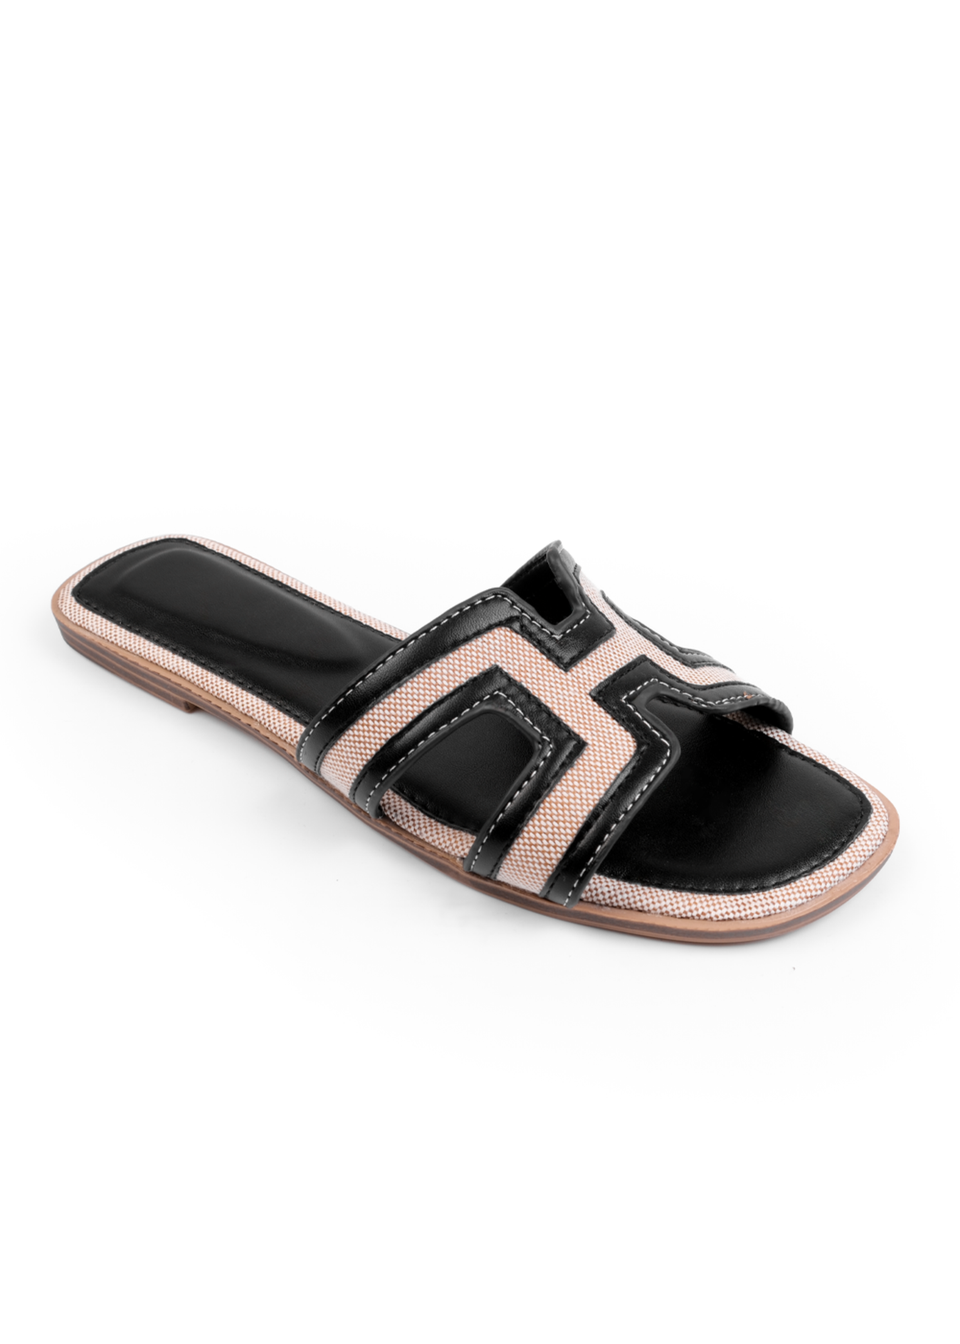 Where's That From Black Surge Cut Out Strap Flat Sandals